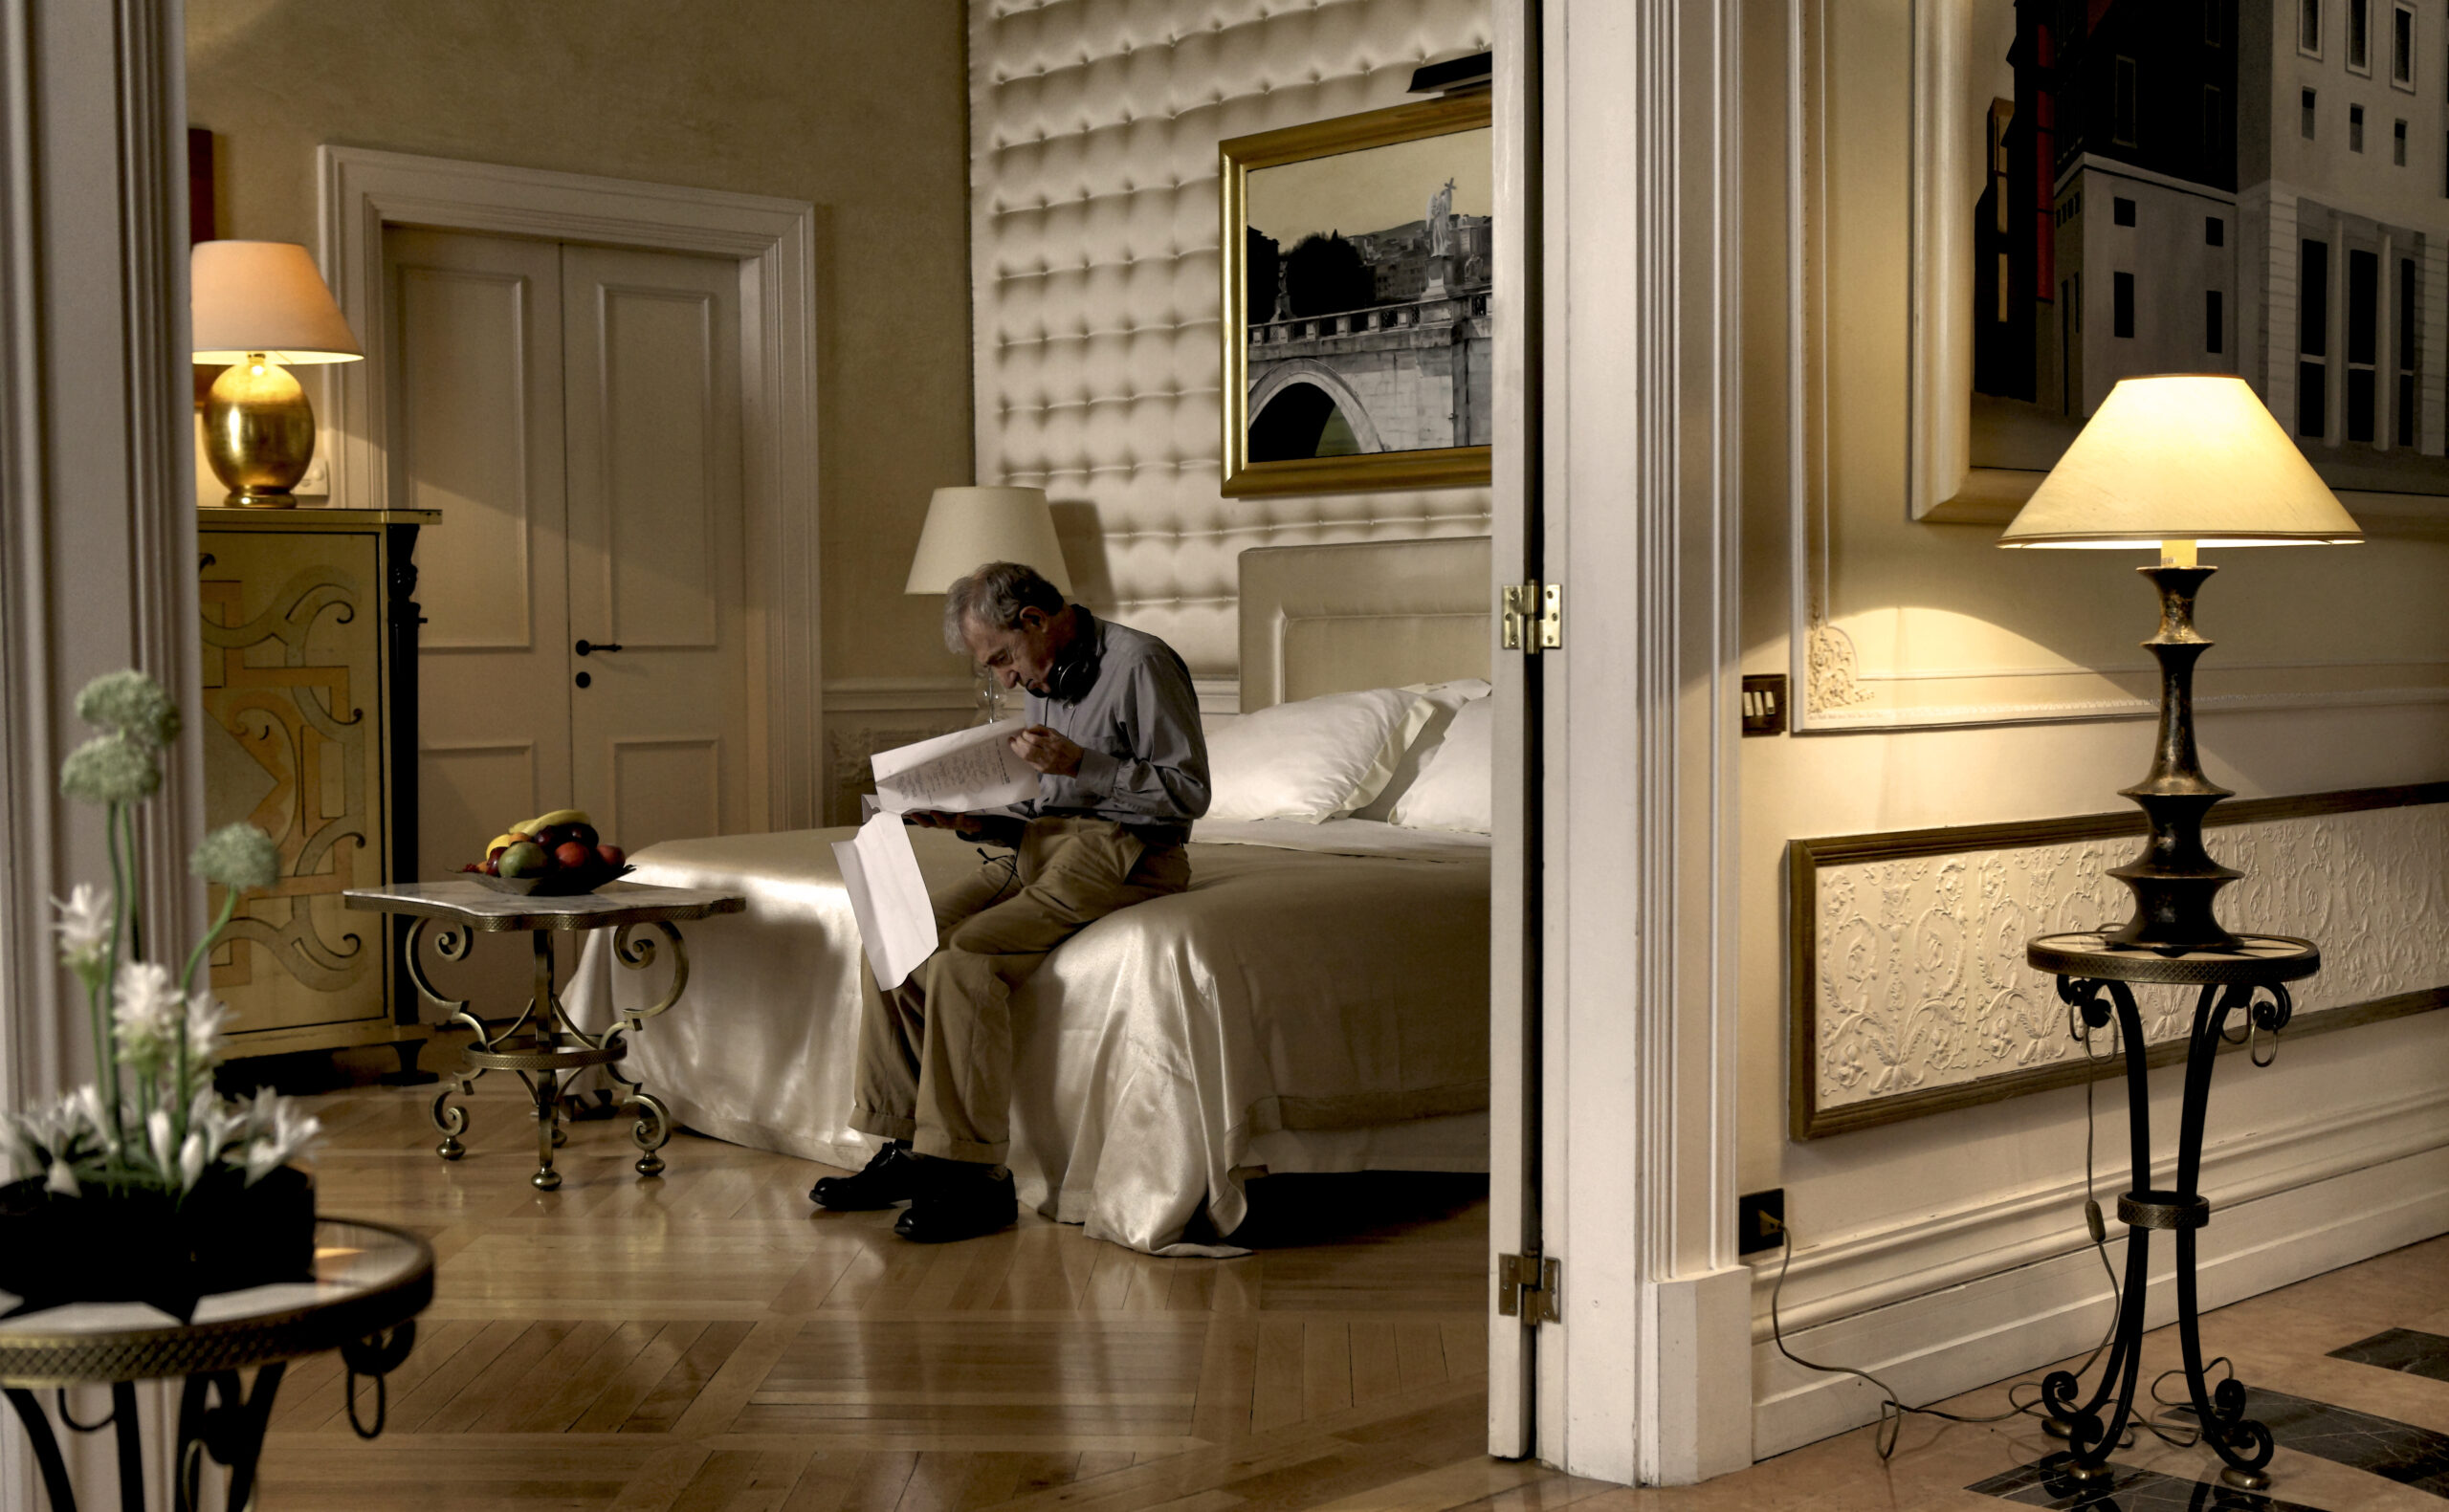 TO ROME WITH LOVE - Directed by Woody Allen - Int. Luca’s Hotel Room - ©2012 - Sony Pictures